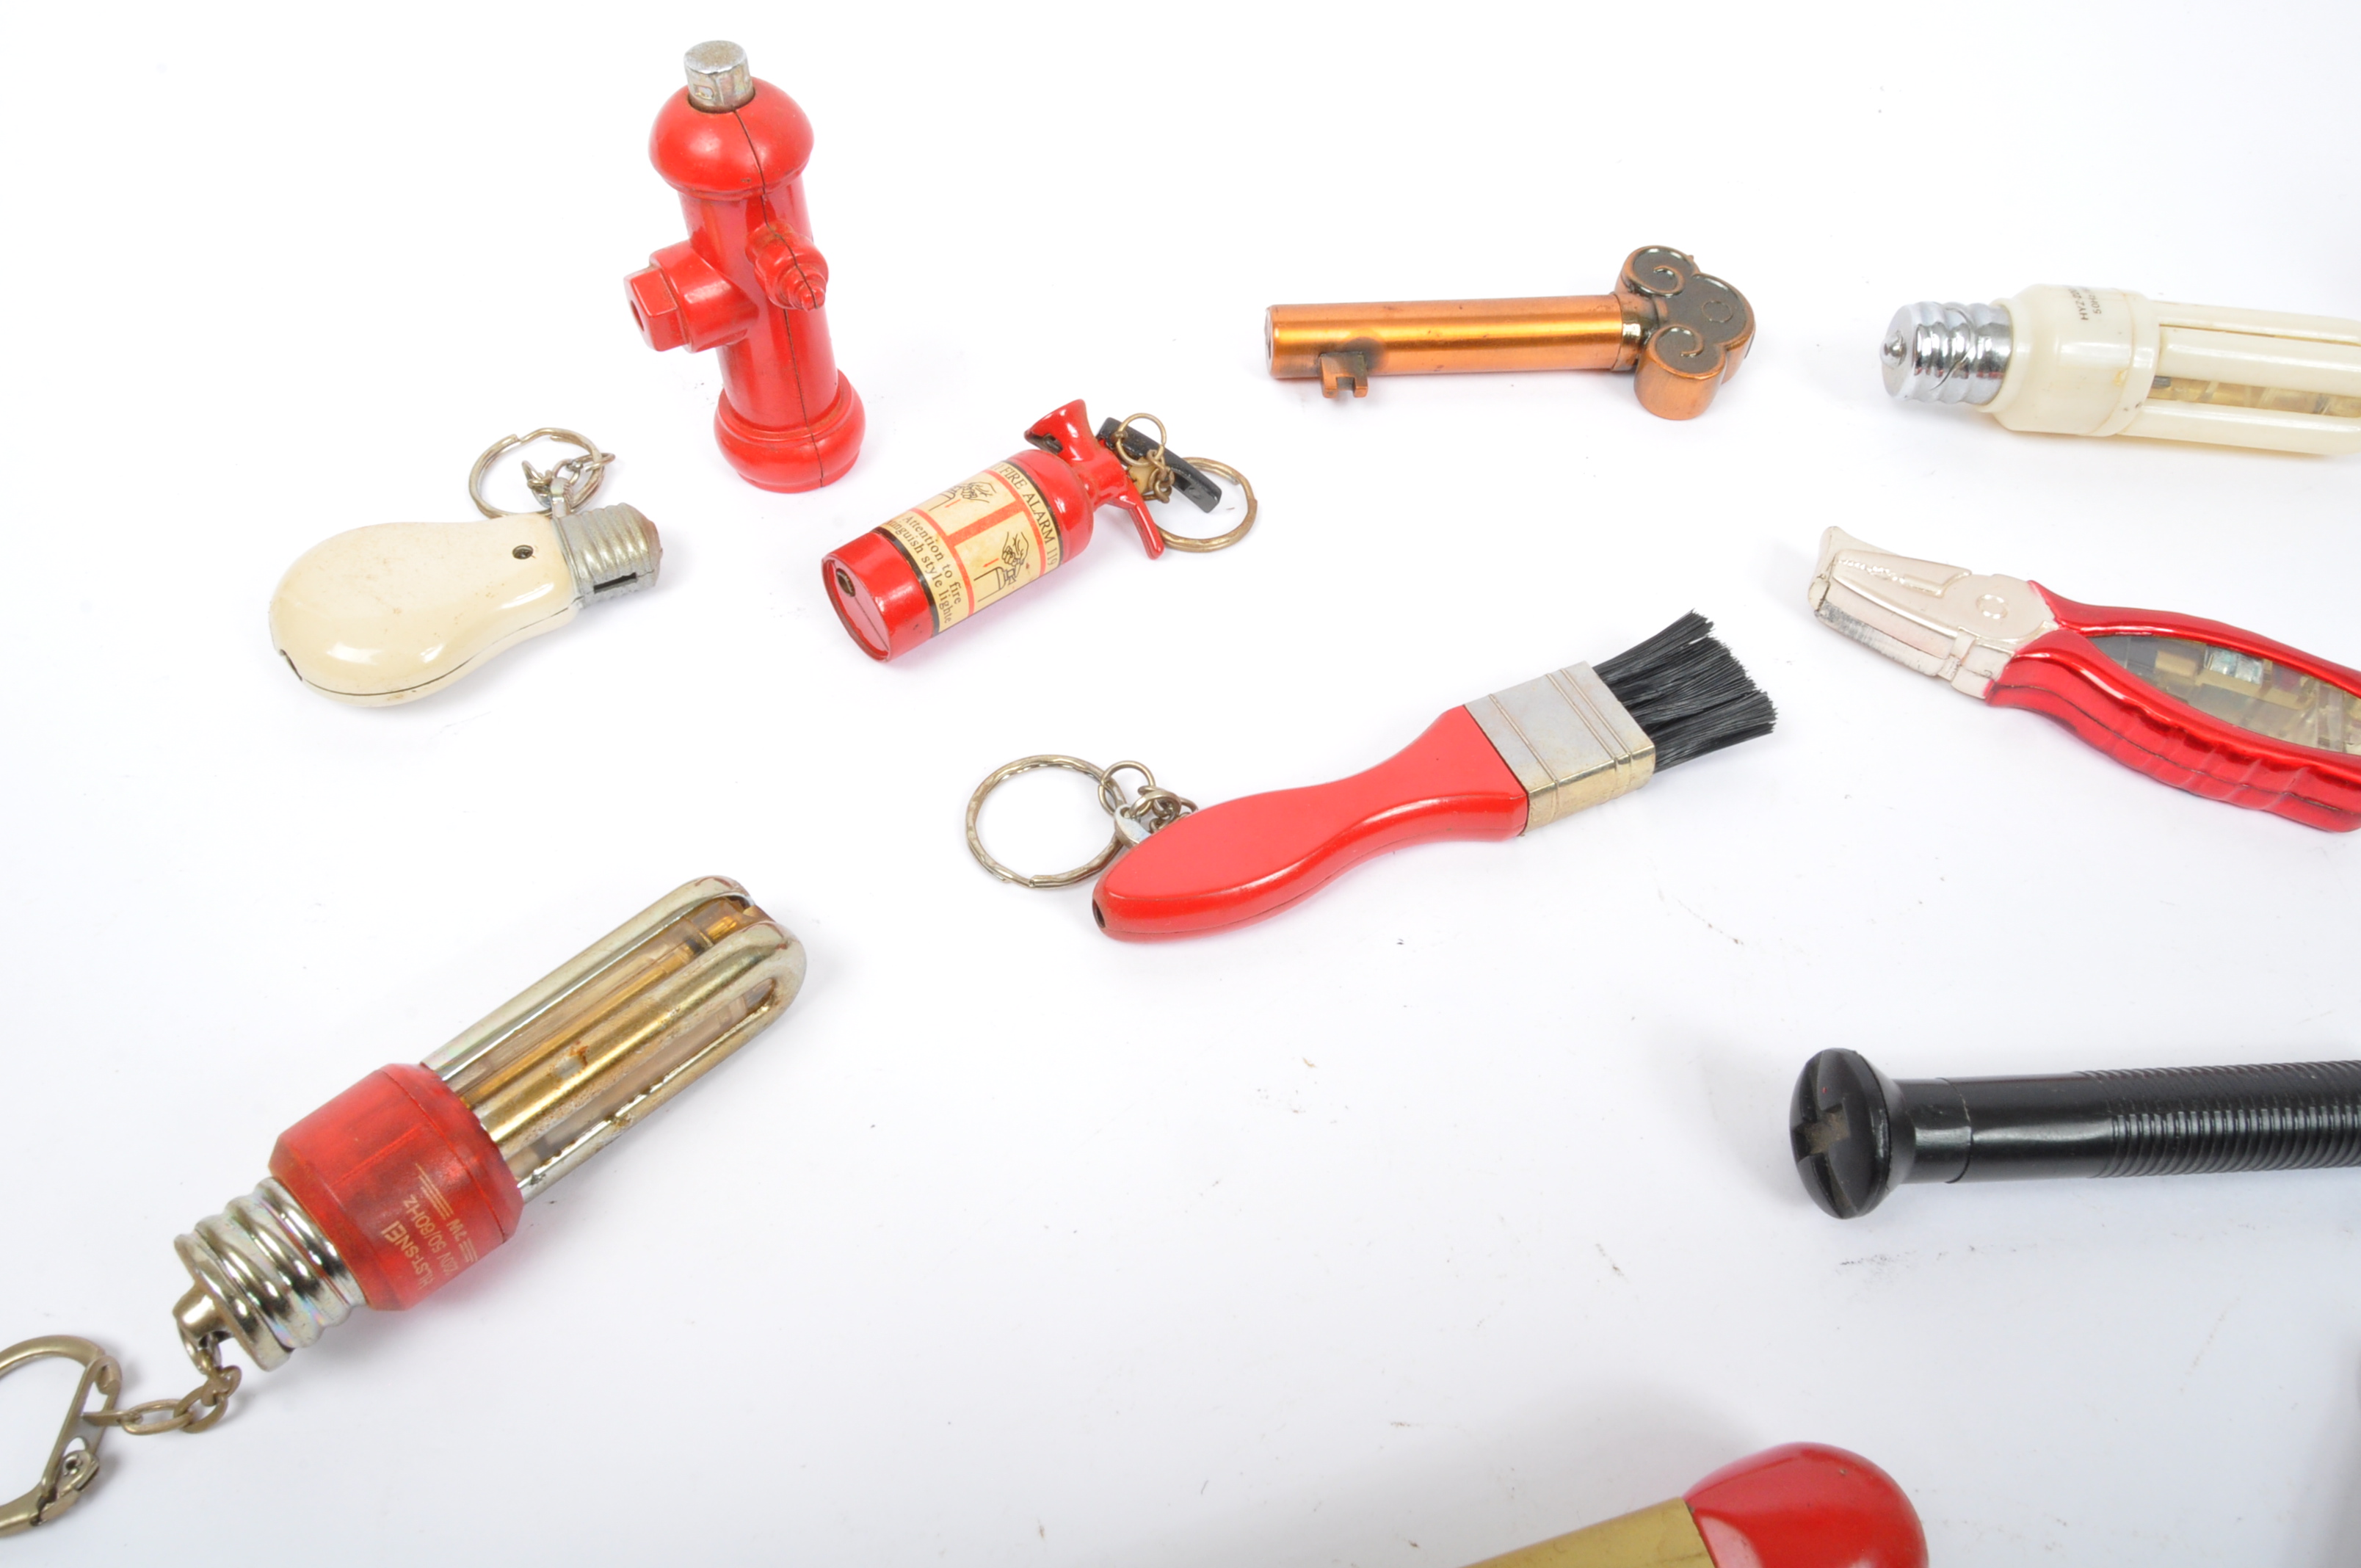 ASSORTMENT OF VINTAGE NOVELTY TOOLS THEMED LIGHTERS - Image 4 of 5